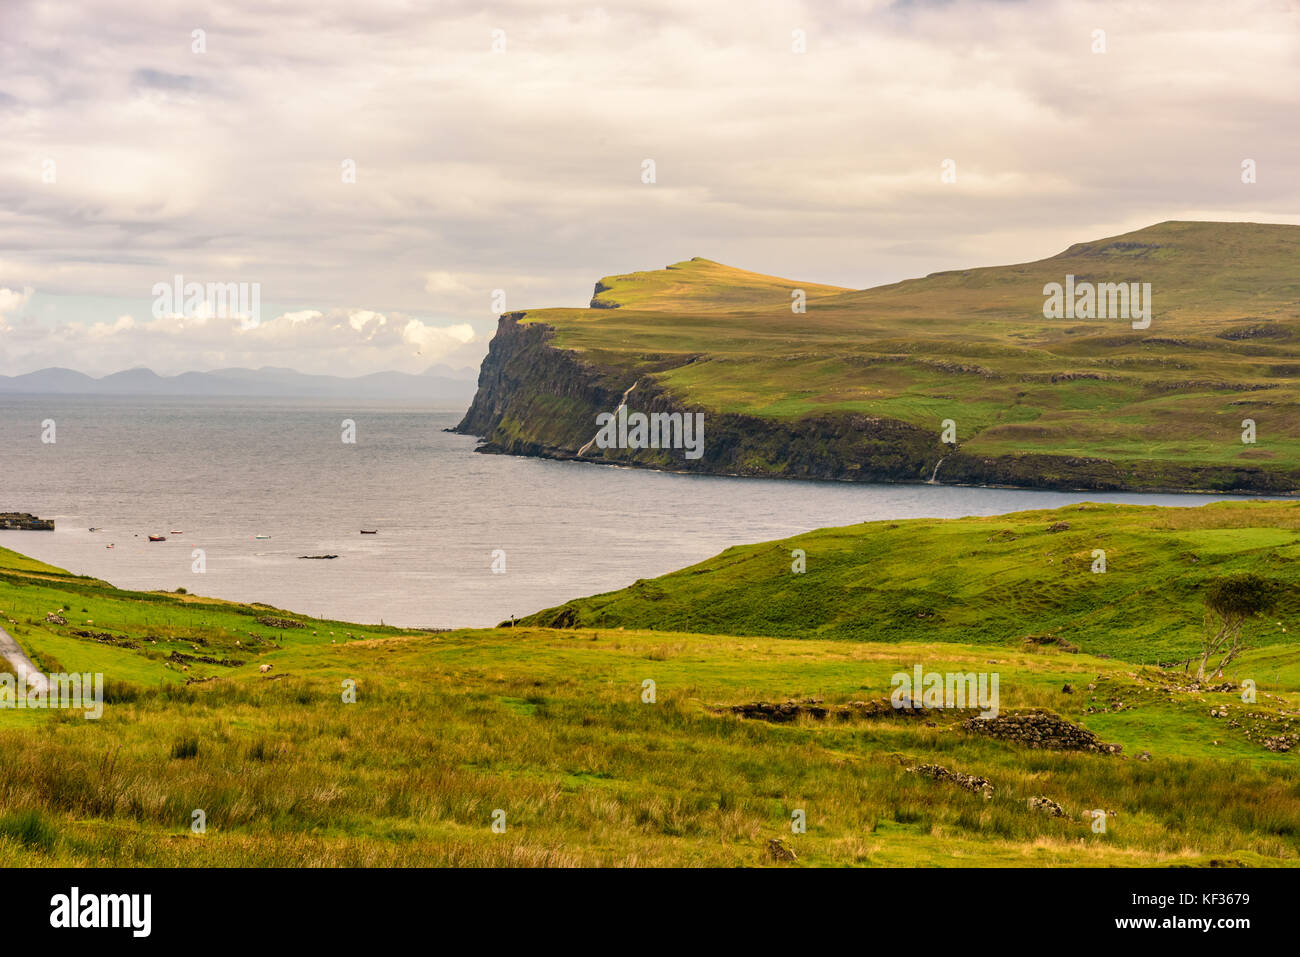 Scenic view of the wonderful nature near Portree, a small town in the Isle of Skye, Scotland Stock Photo